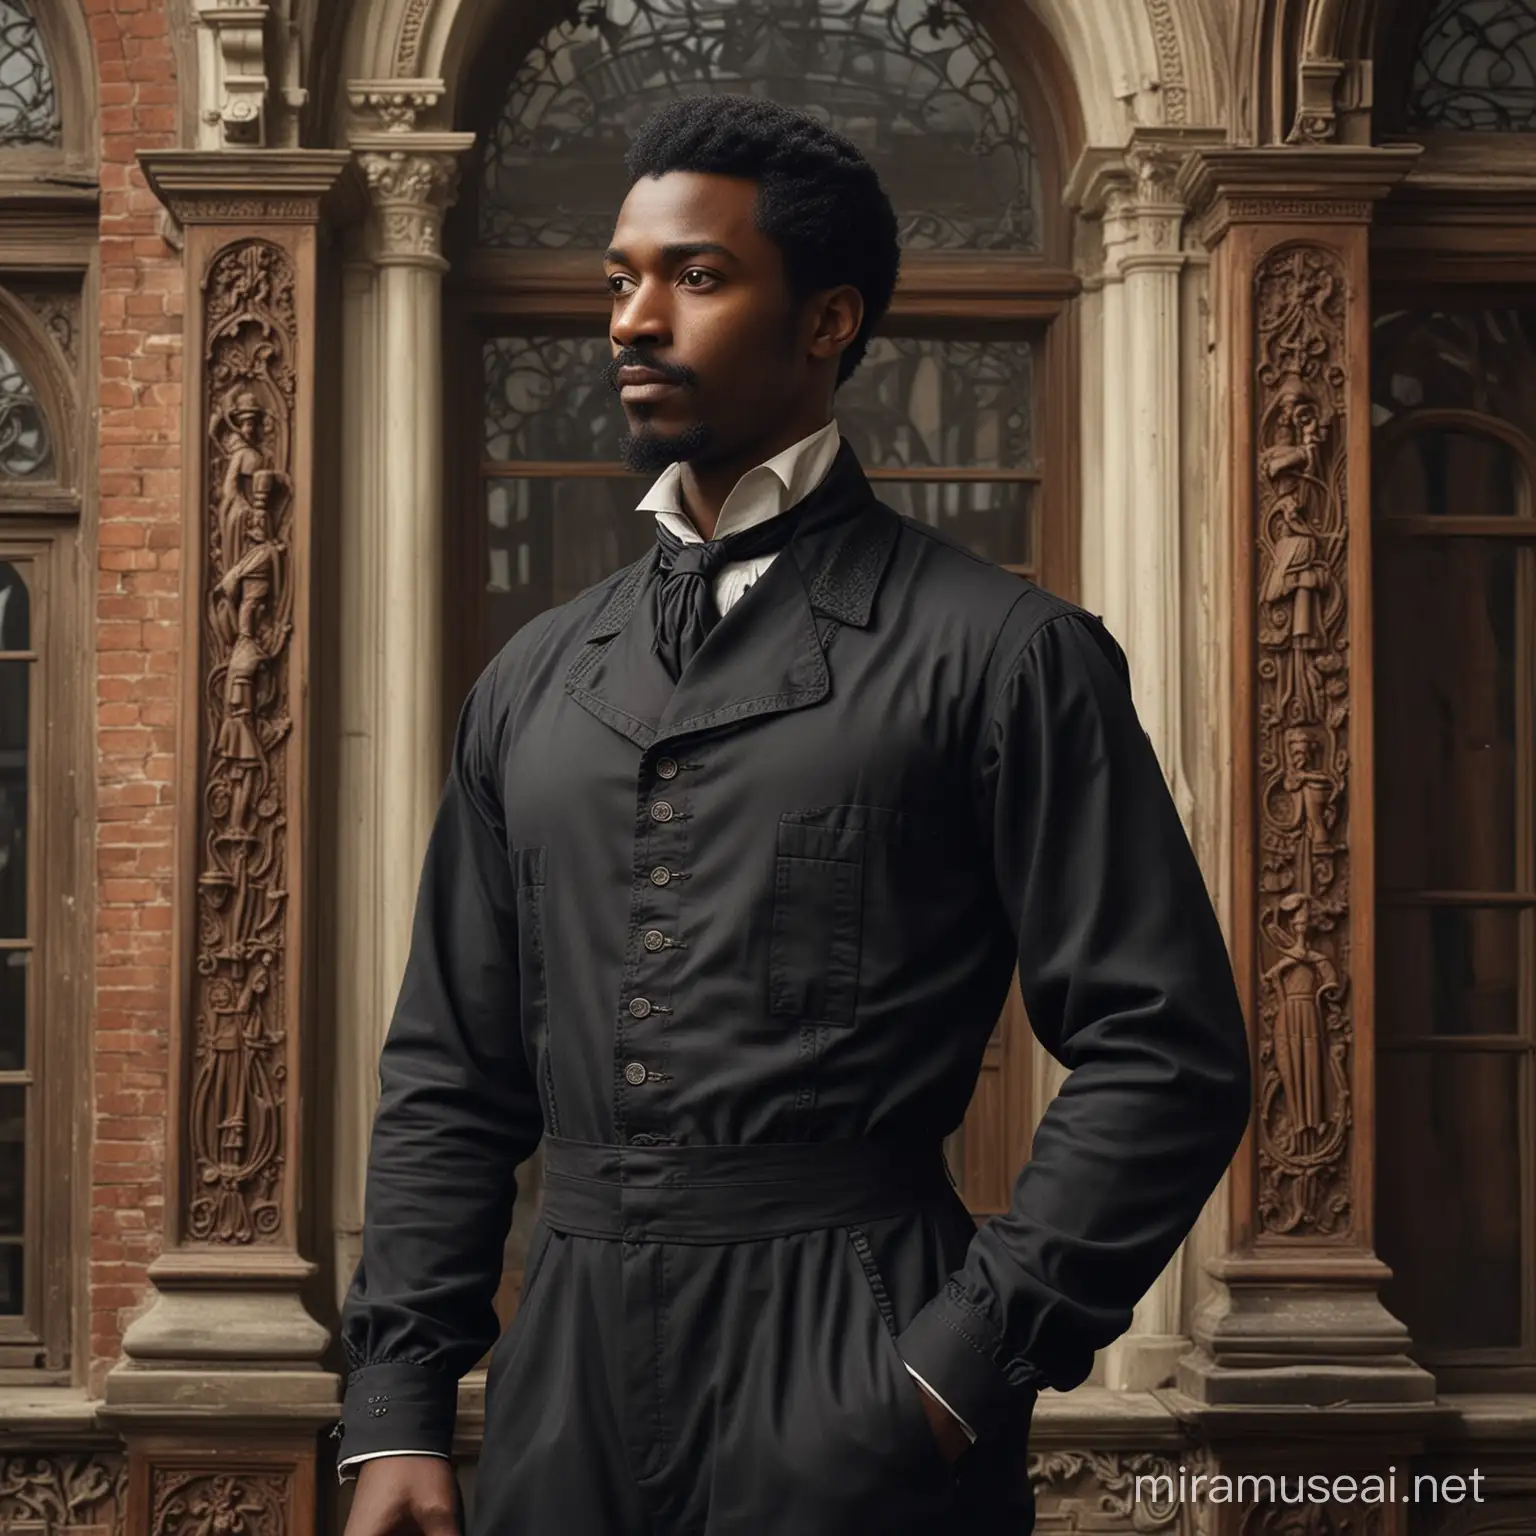 The medium-height black man is depicted in a Victorian-era setting, with elaborate architecture in the background, characteristic of the time, adorned with ornate details and tall windows. He is dressed in a mechanic's jumpsuit typical of the era, adapted to the Victorian style, with a touch of elegance. His seductive mustache and medium beard add an air of mystery and charm to his face, while his firm and confident posture reflects his determination and skill. The contrast between his figure and the historical environment creates a visually captivating composition.